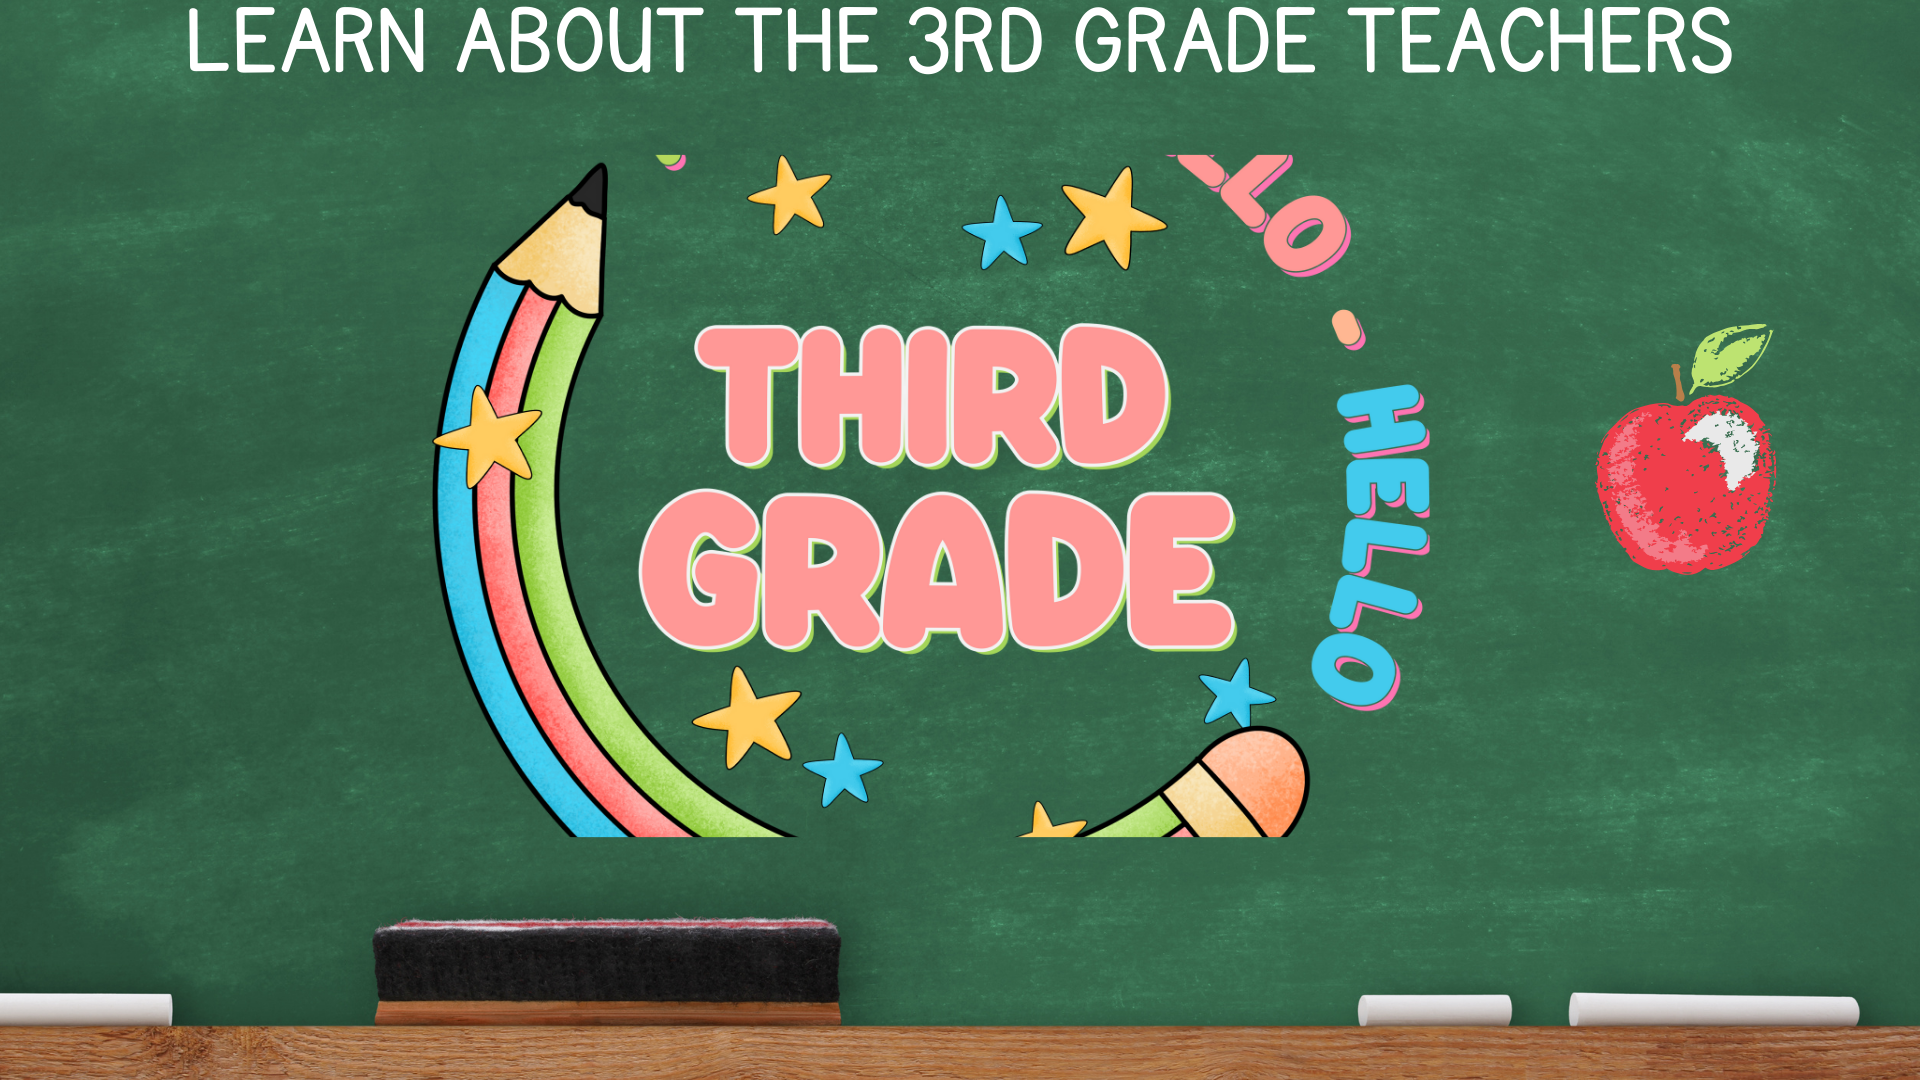 Image displaying a chalkboard with the message of hello third grade in the middle of it